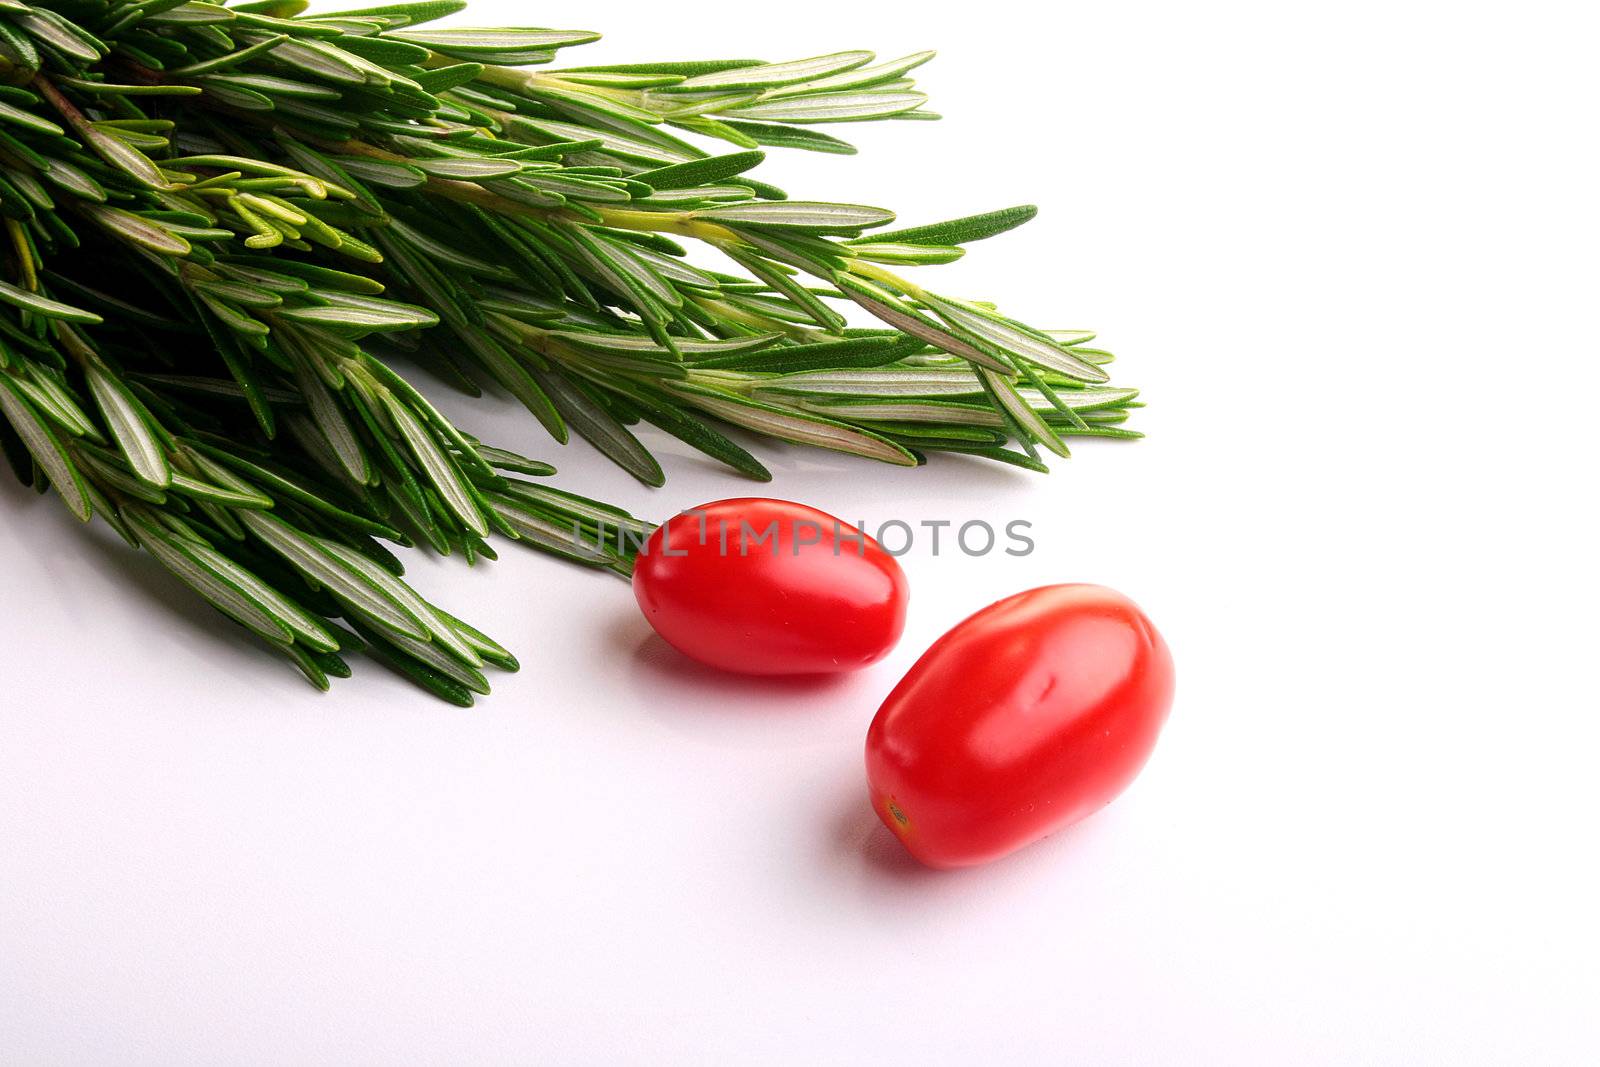 Two small red tomatoes and saffron branch.